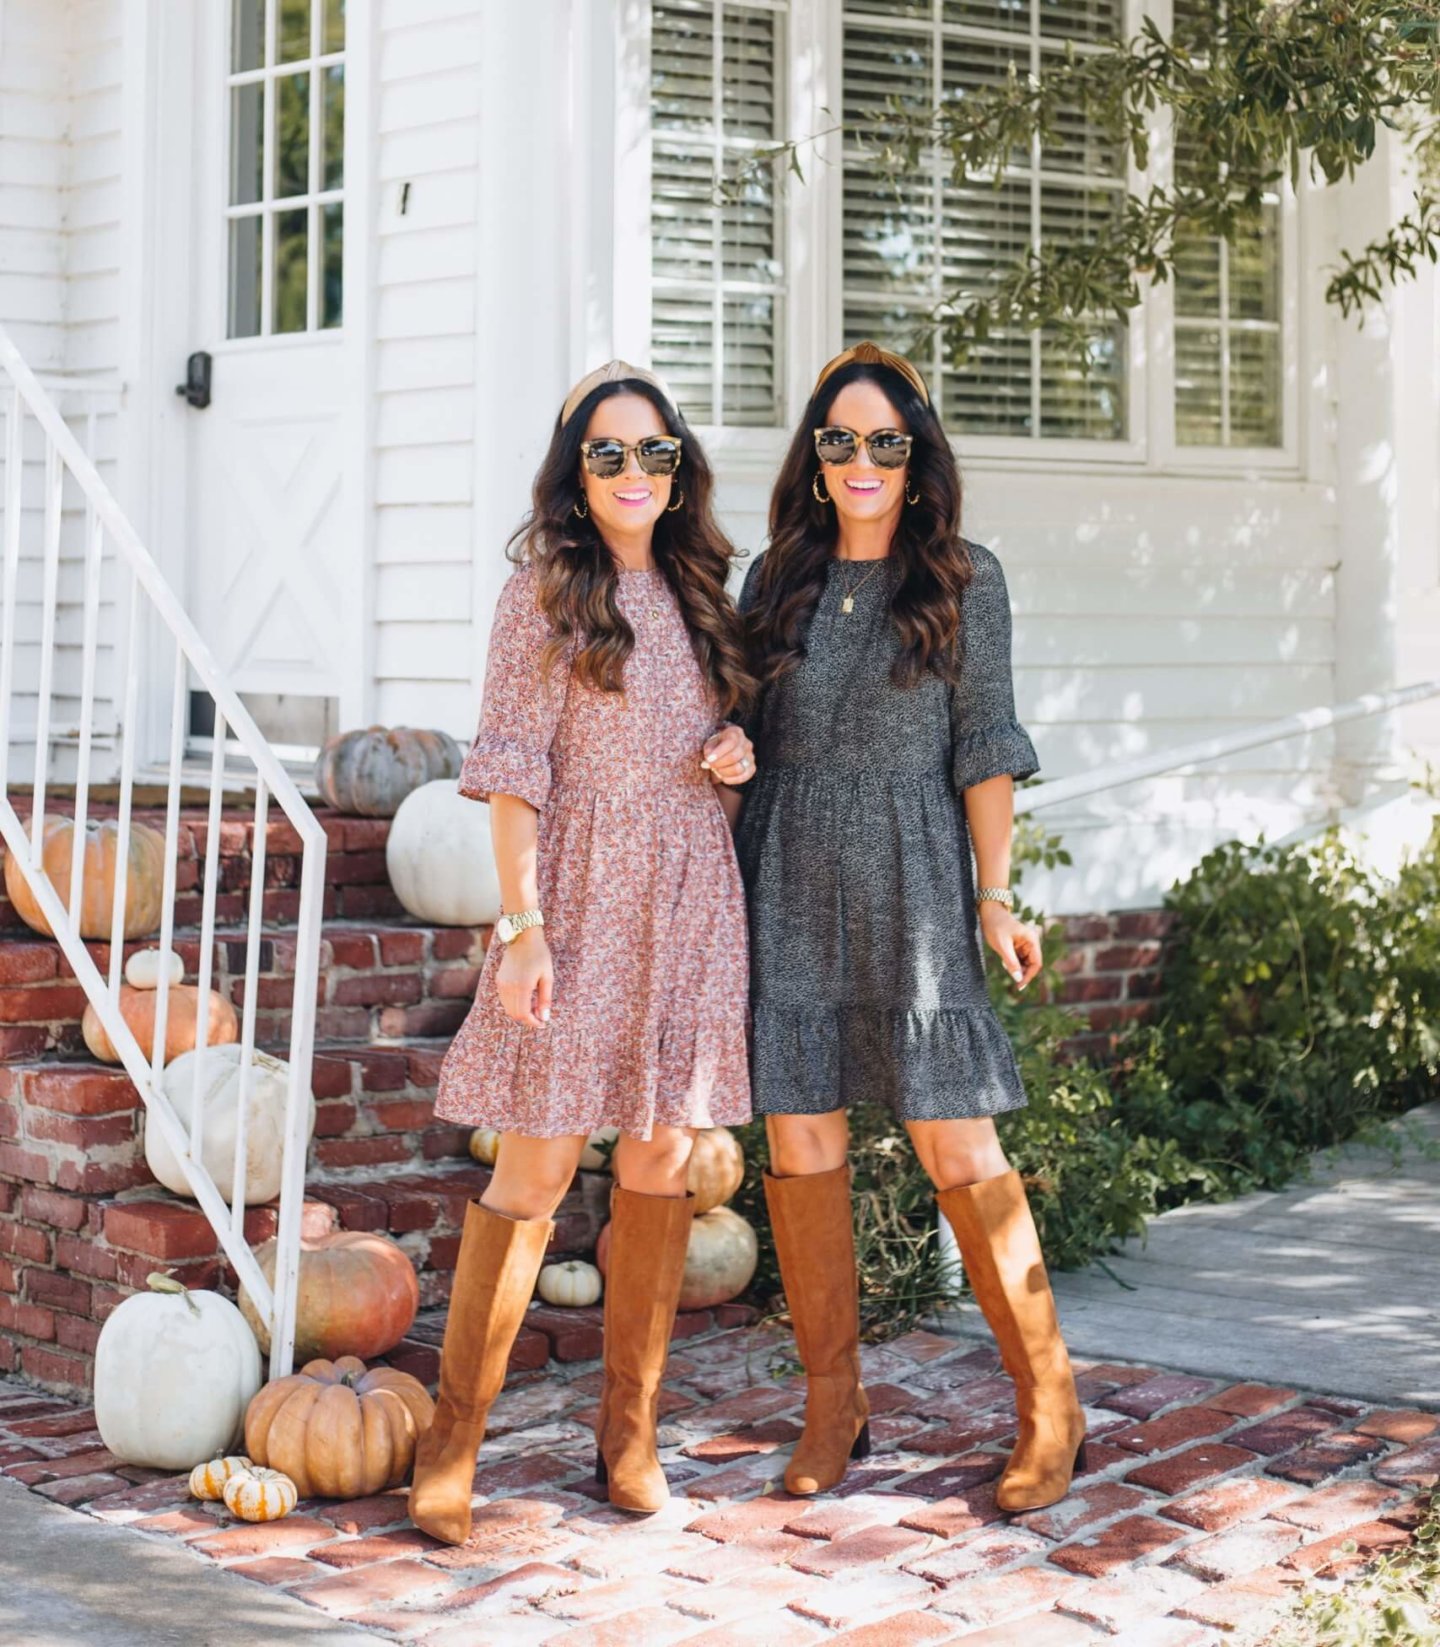 Festive Fall Outfits Now 40% Off! - The Double Take Girls